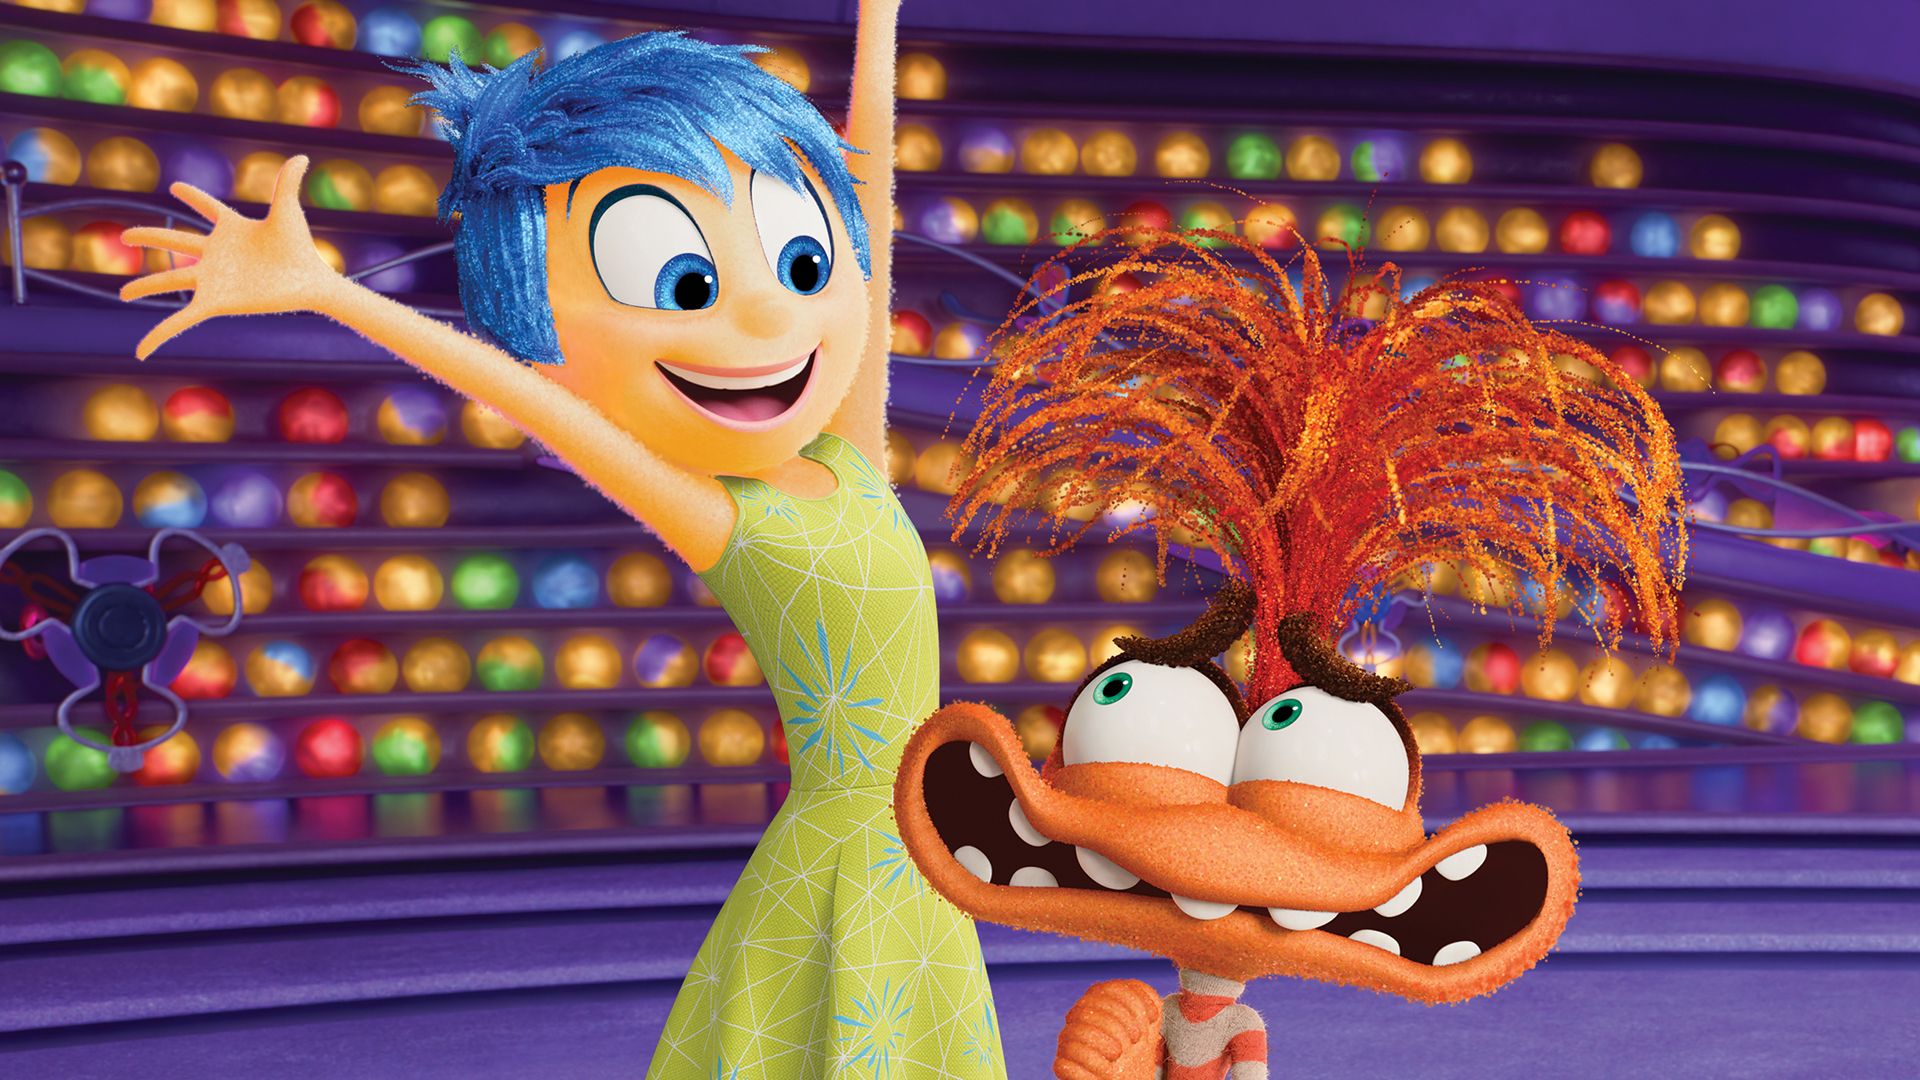 Inside Out 2 - meet the cast of Pixar’s box office hit